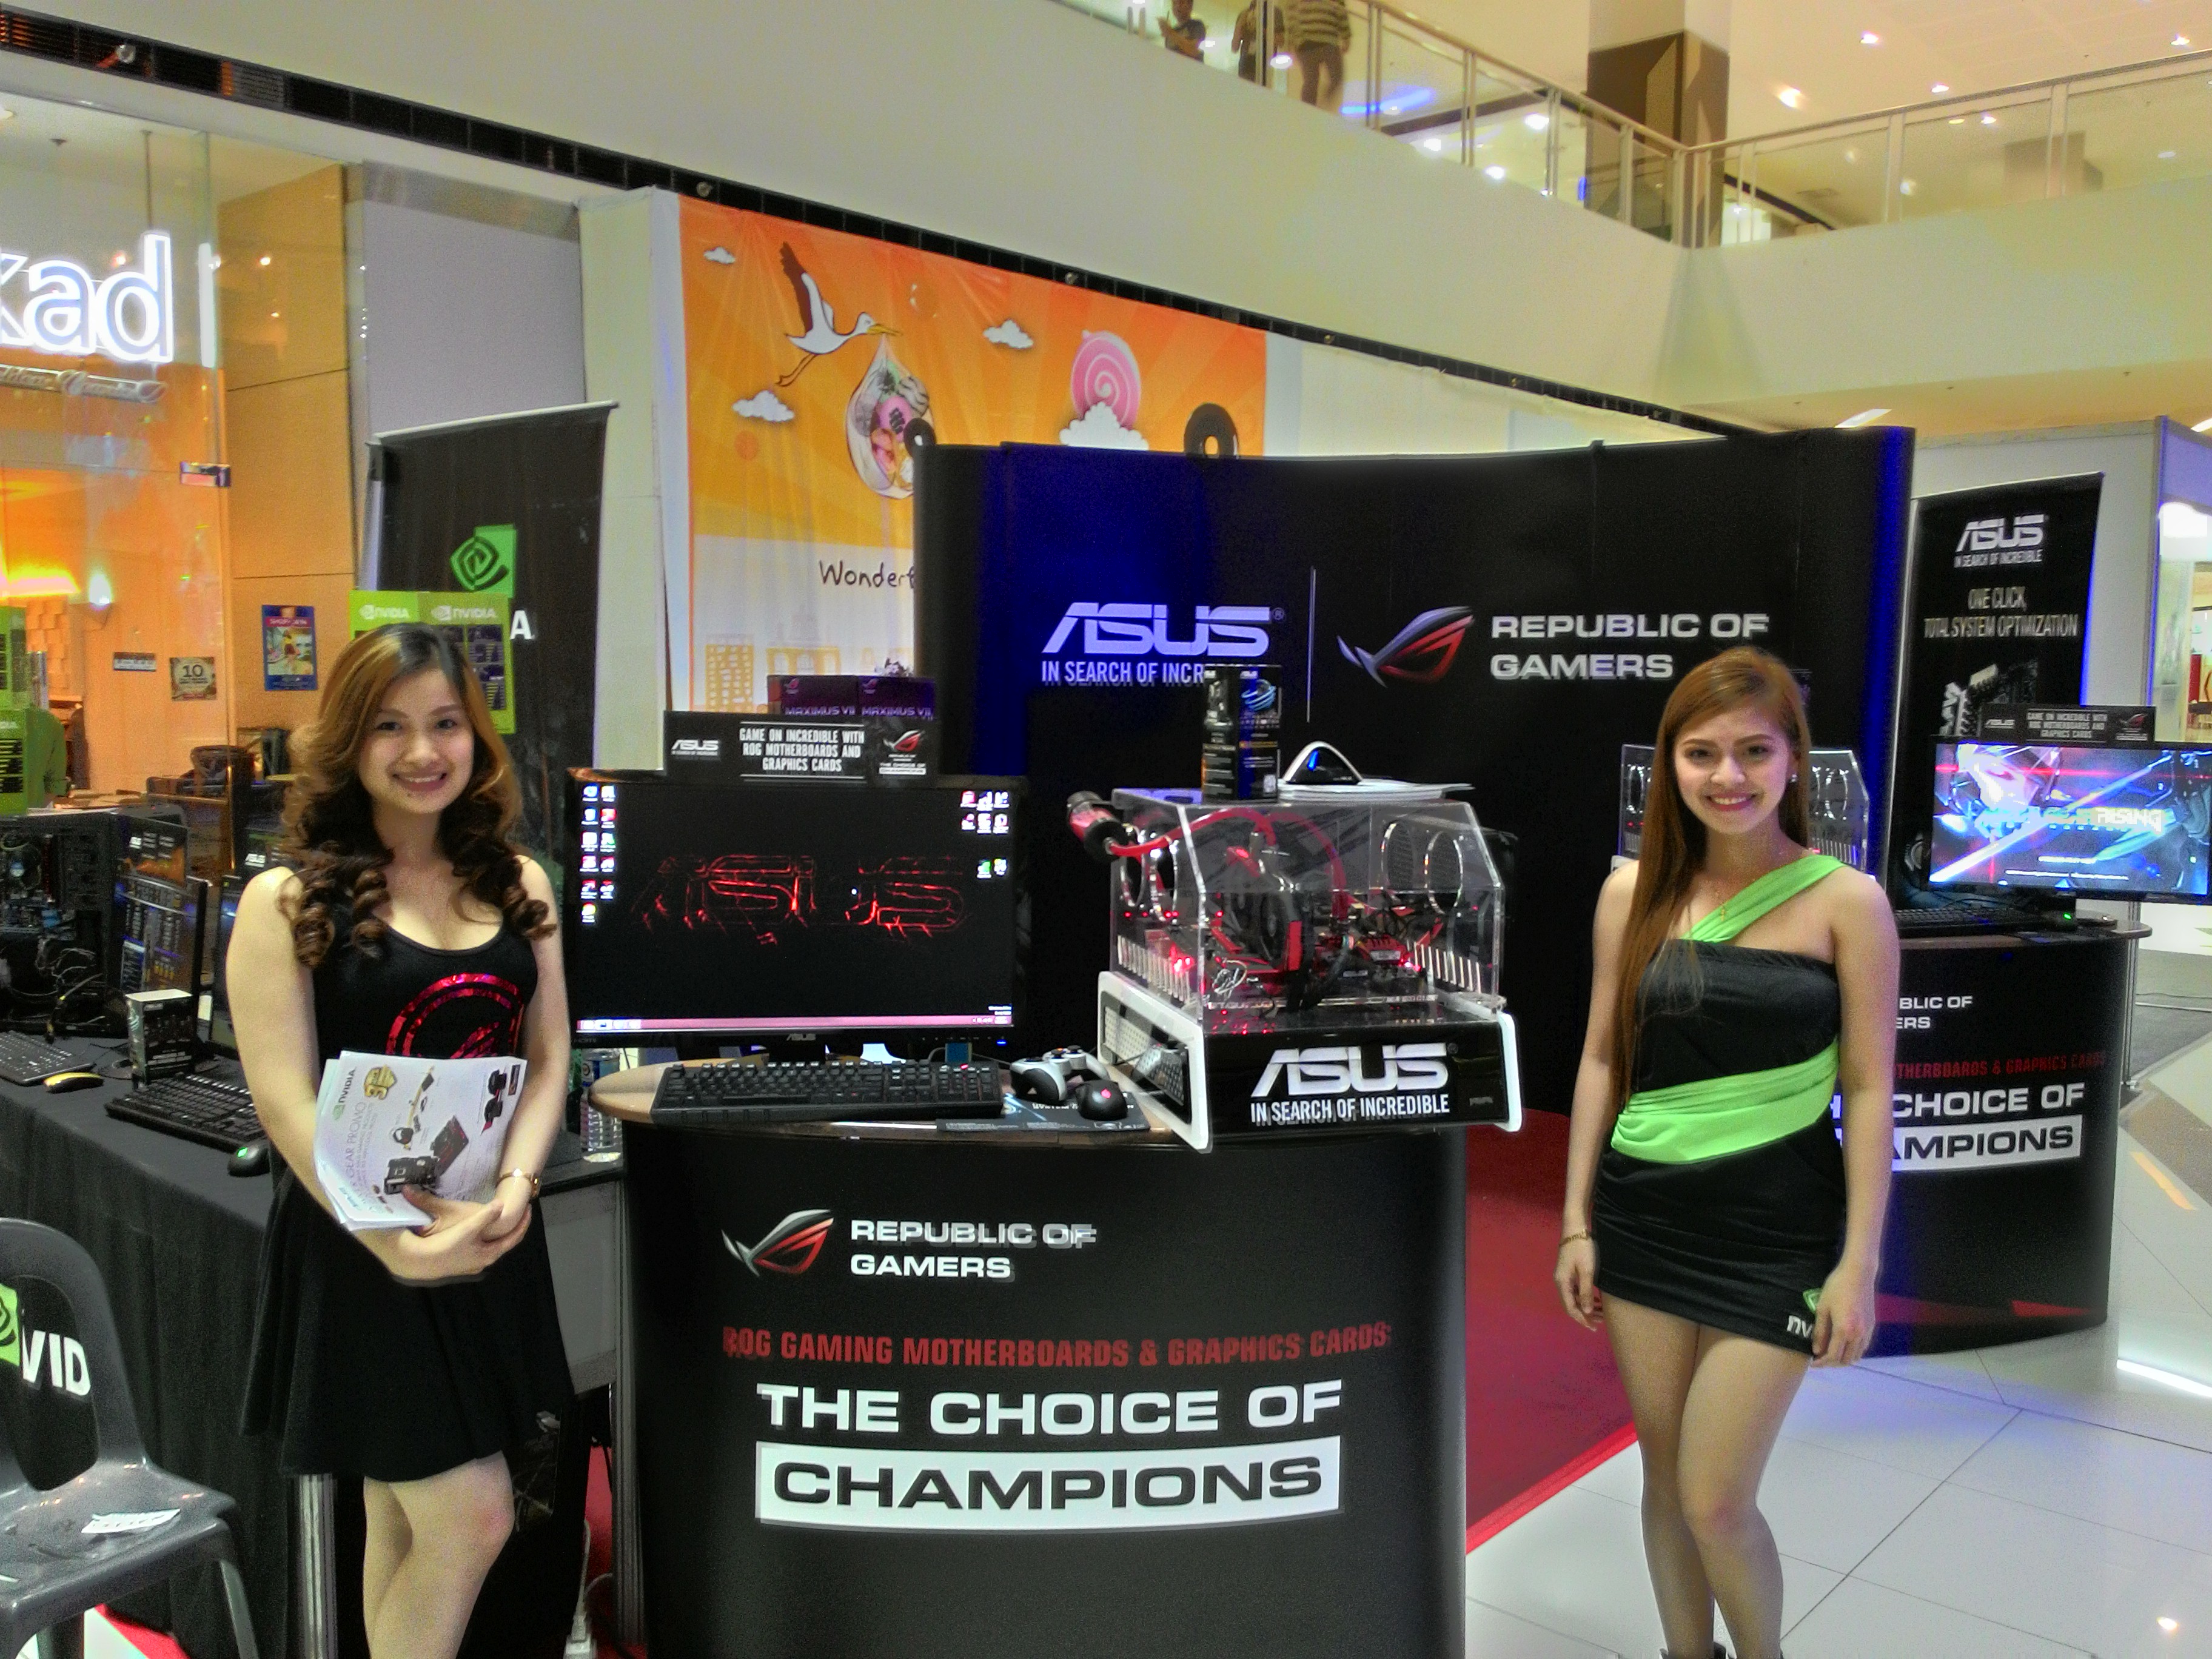 ASUS Booth in SM Davao